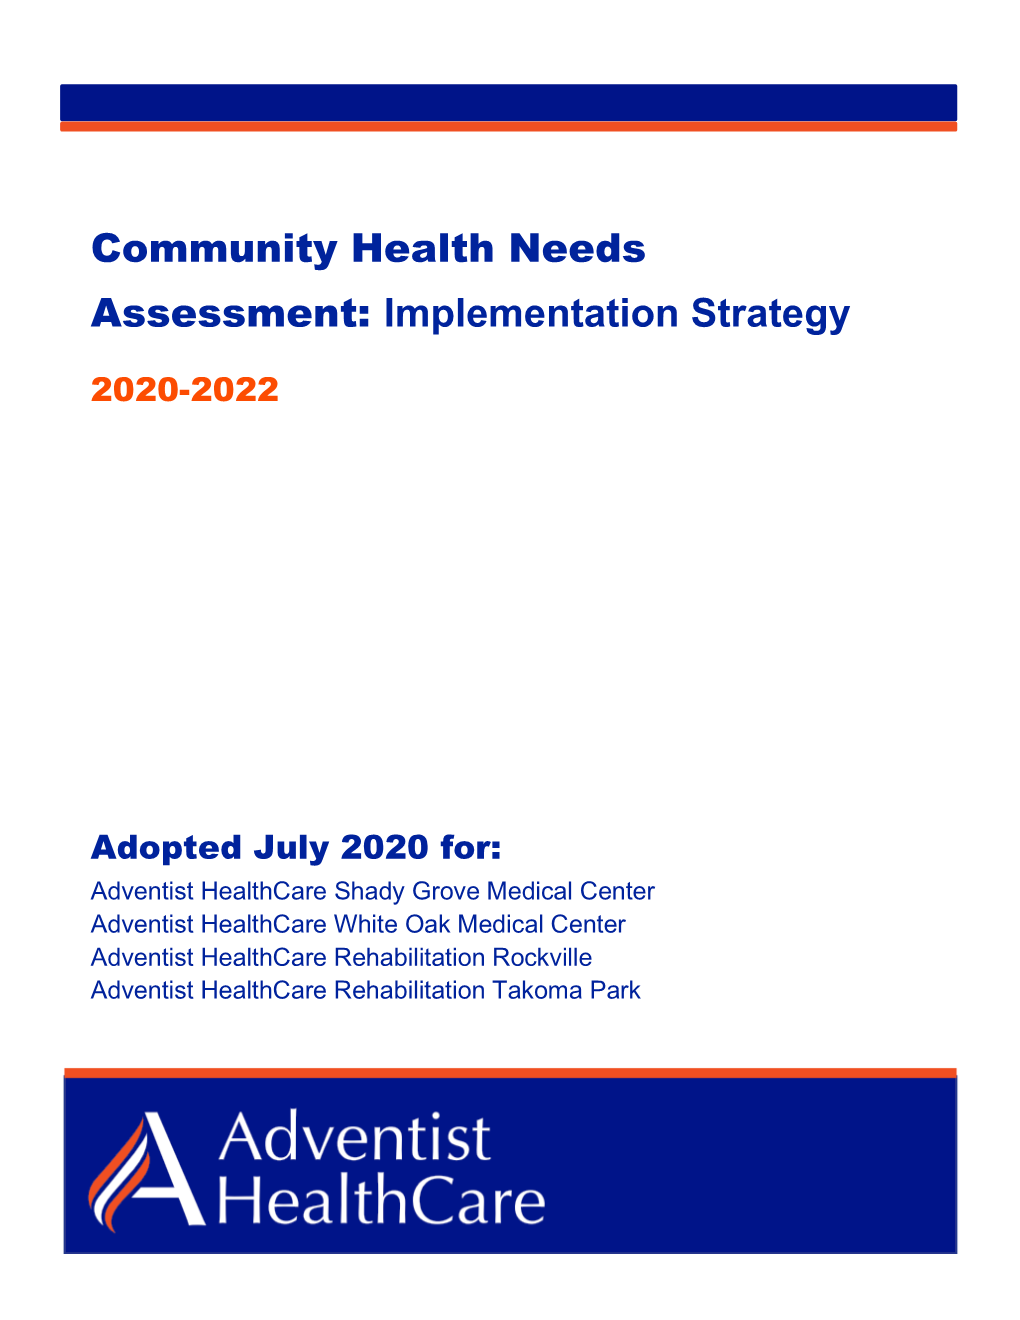 Community Health Needs Assessment: Implementation Strategy